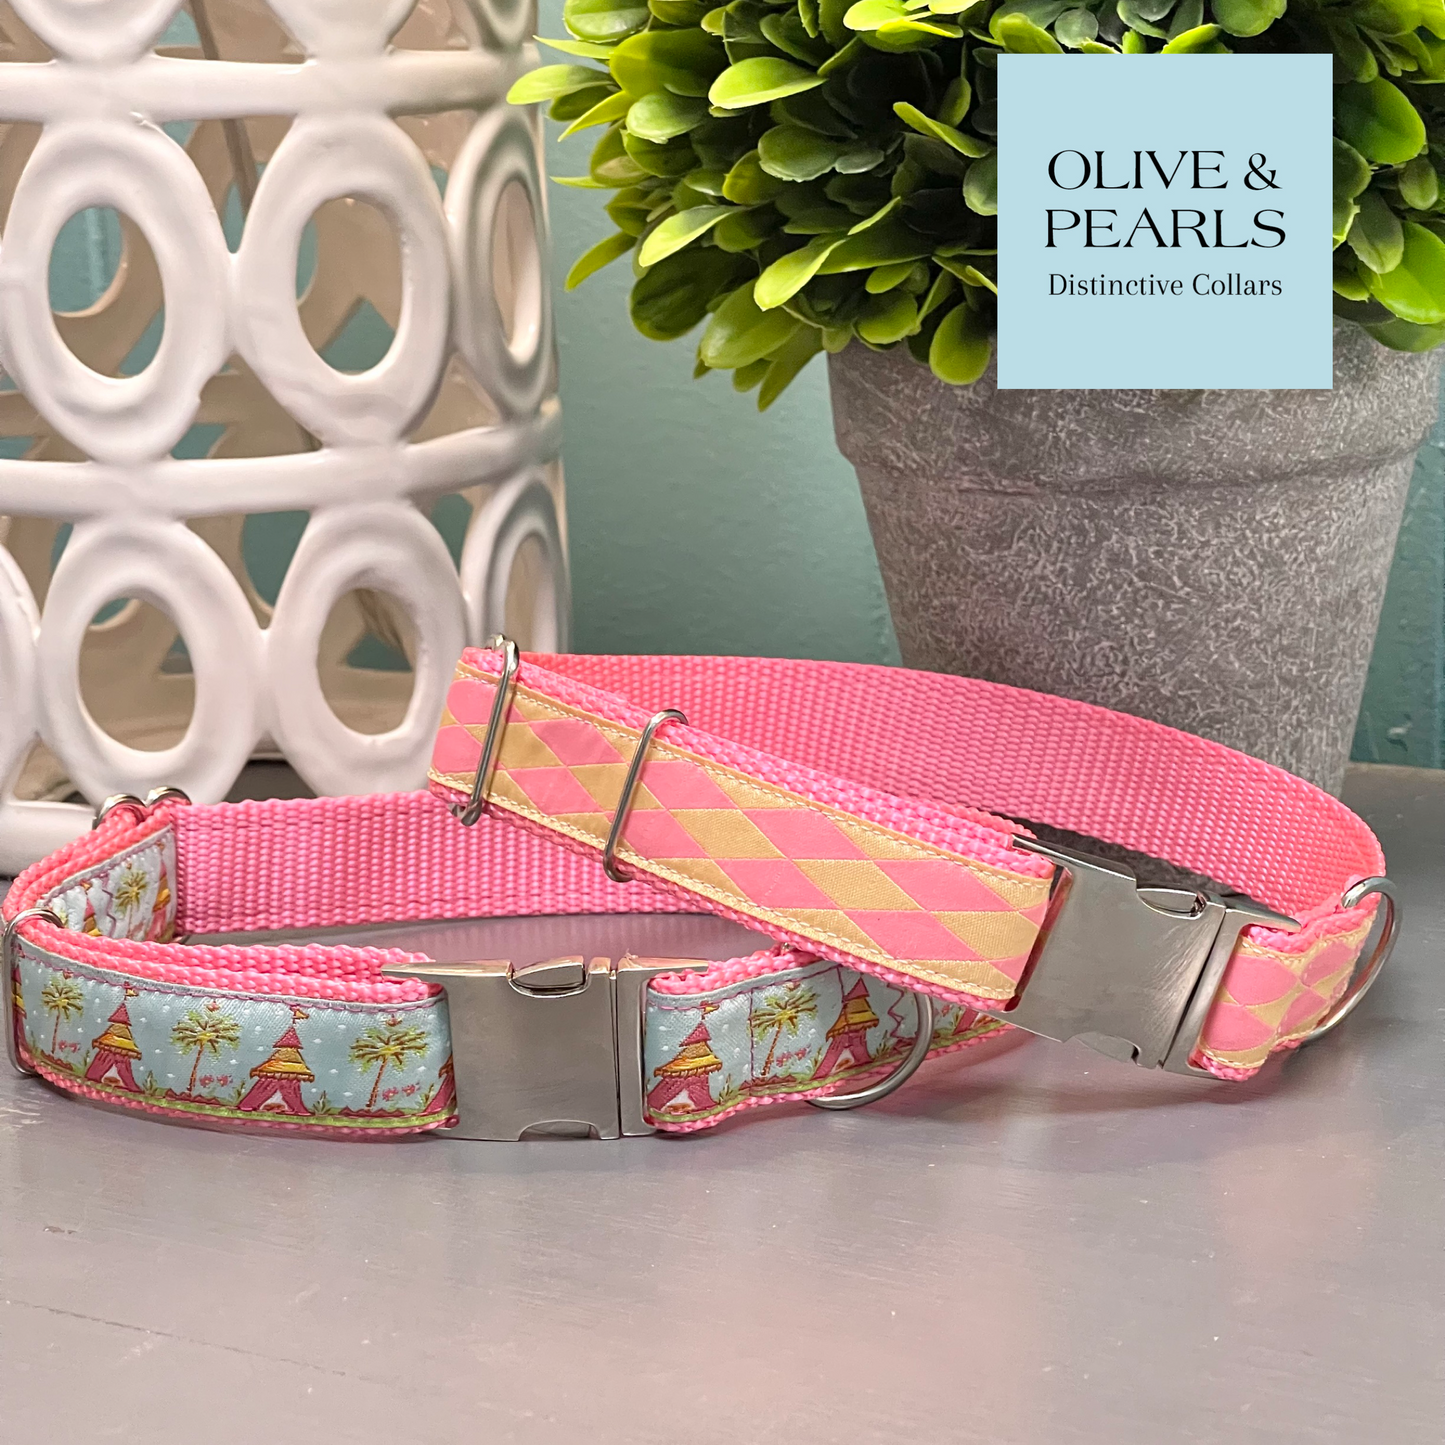 Pink Harlequin Personalized Collar